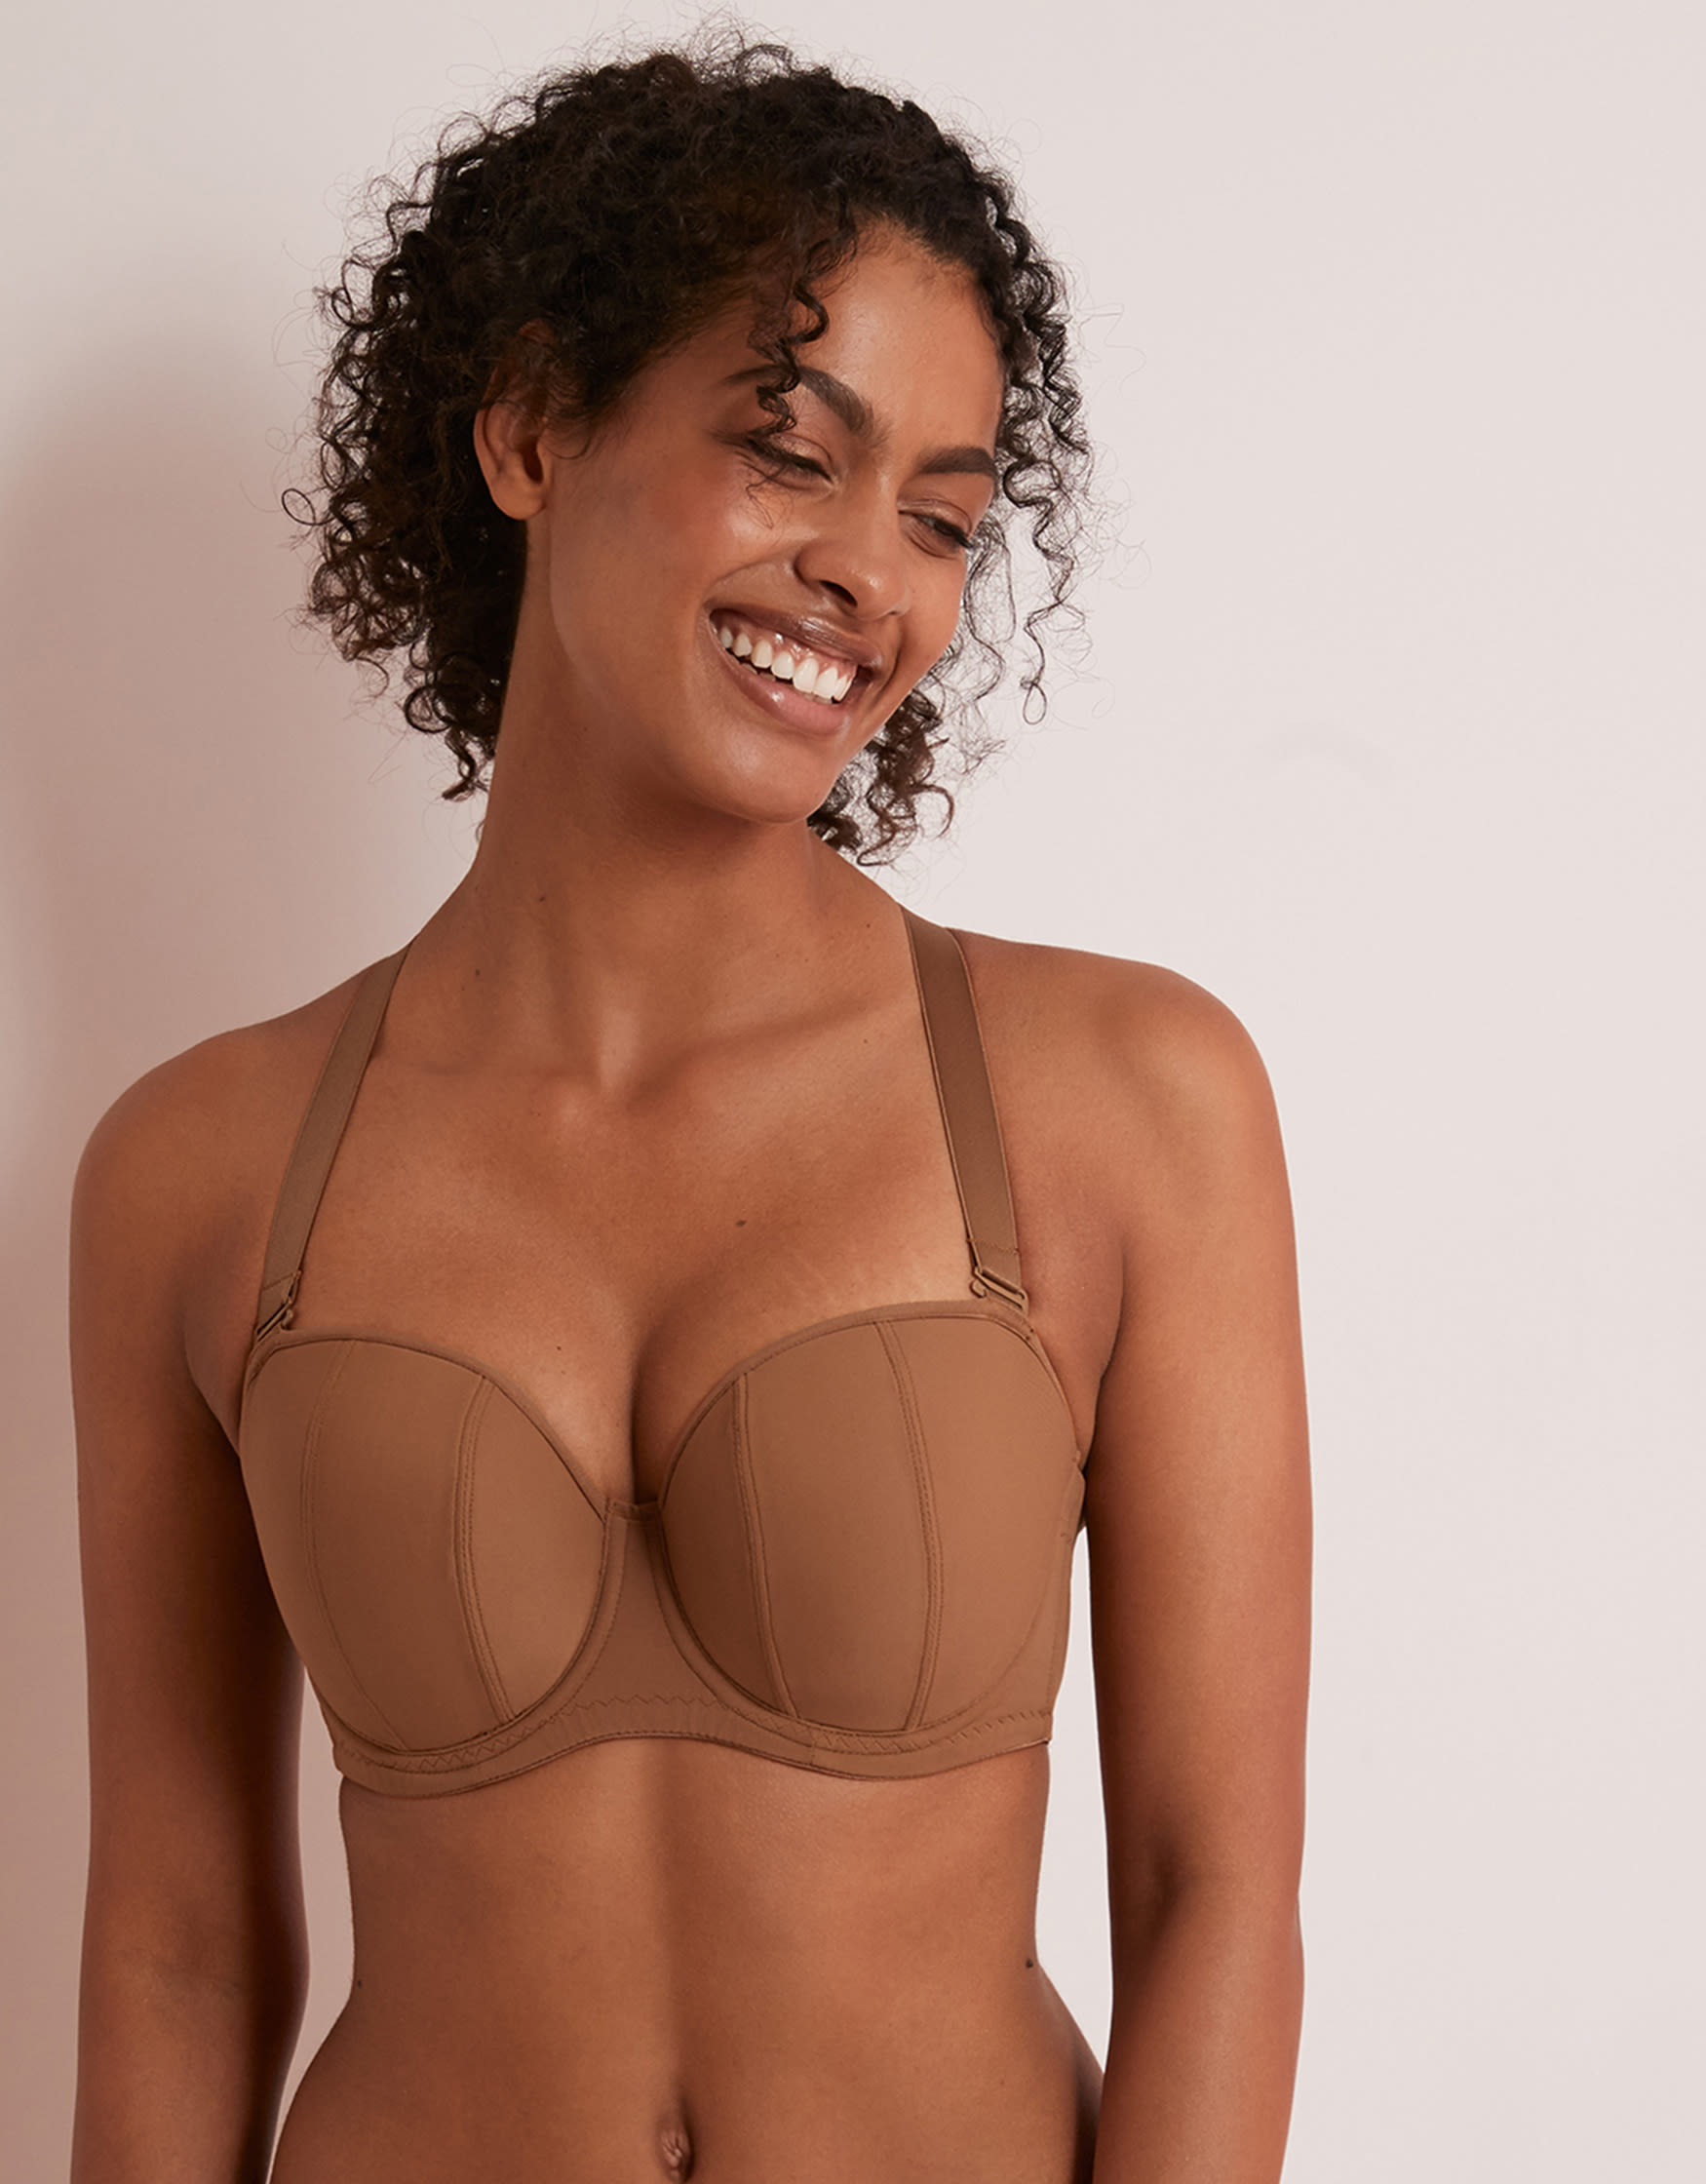 What is the best support bra?, Shape & Support Bra Guide